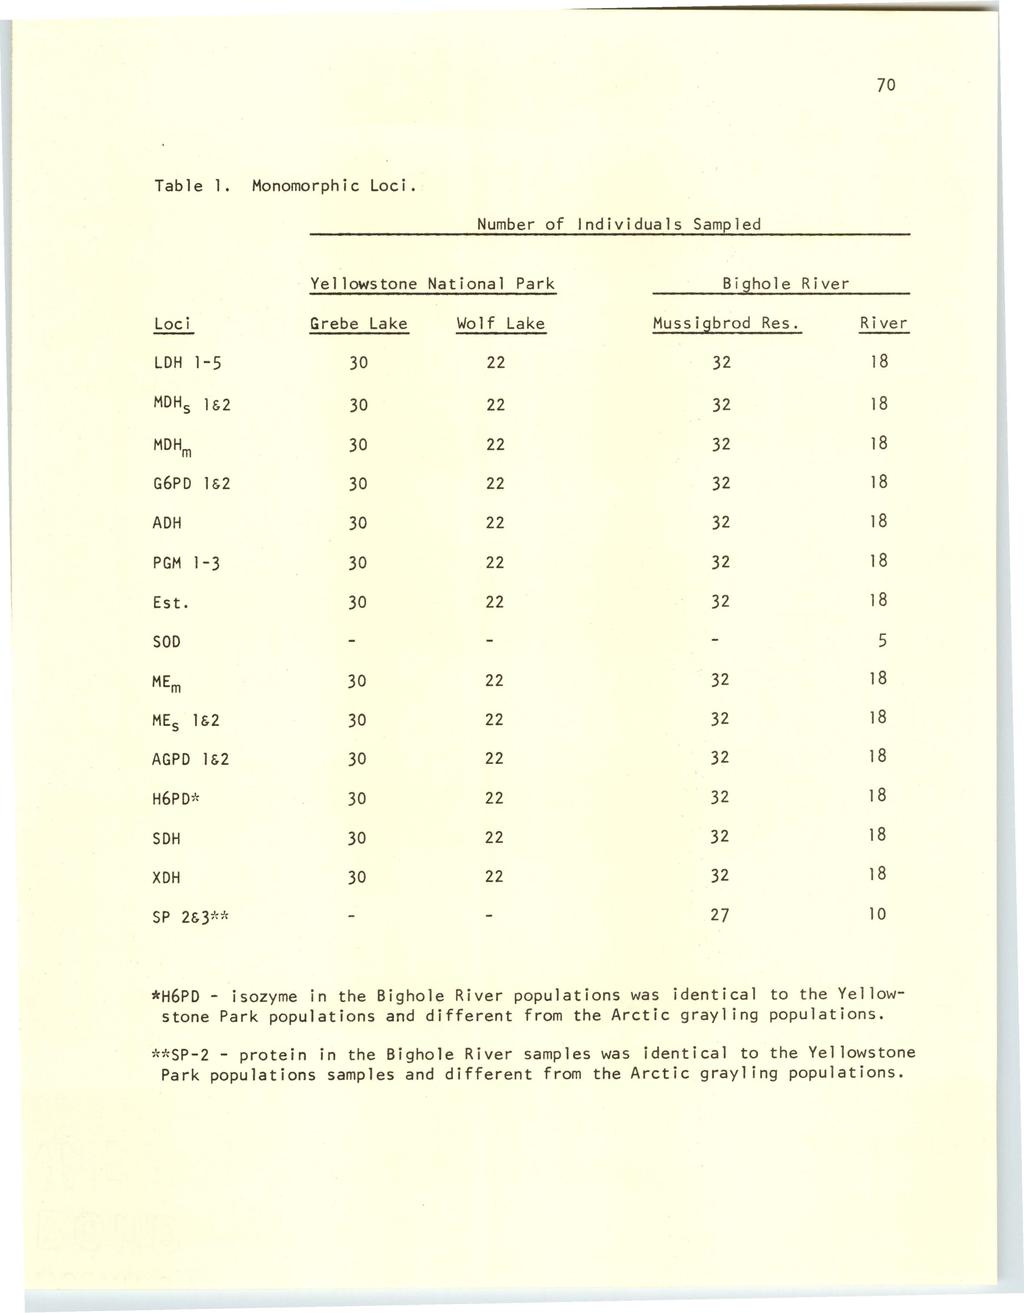 University of Wyoming National Park Service Research Center Annual Report, Vol. 1 [1977], Art. 19 70 Table 1. Monomorphic Loci.